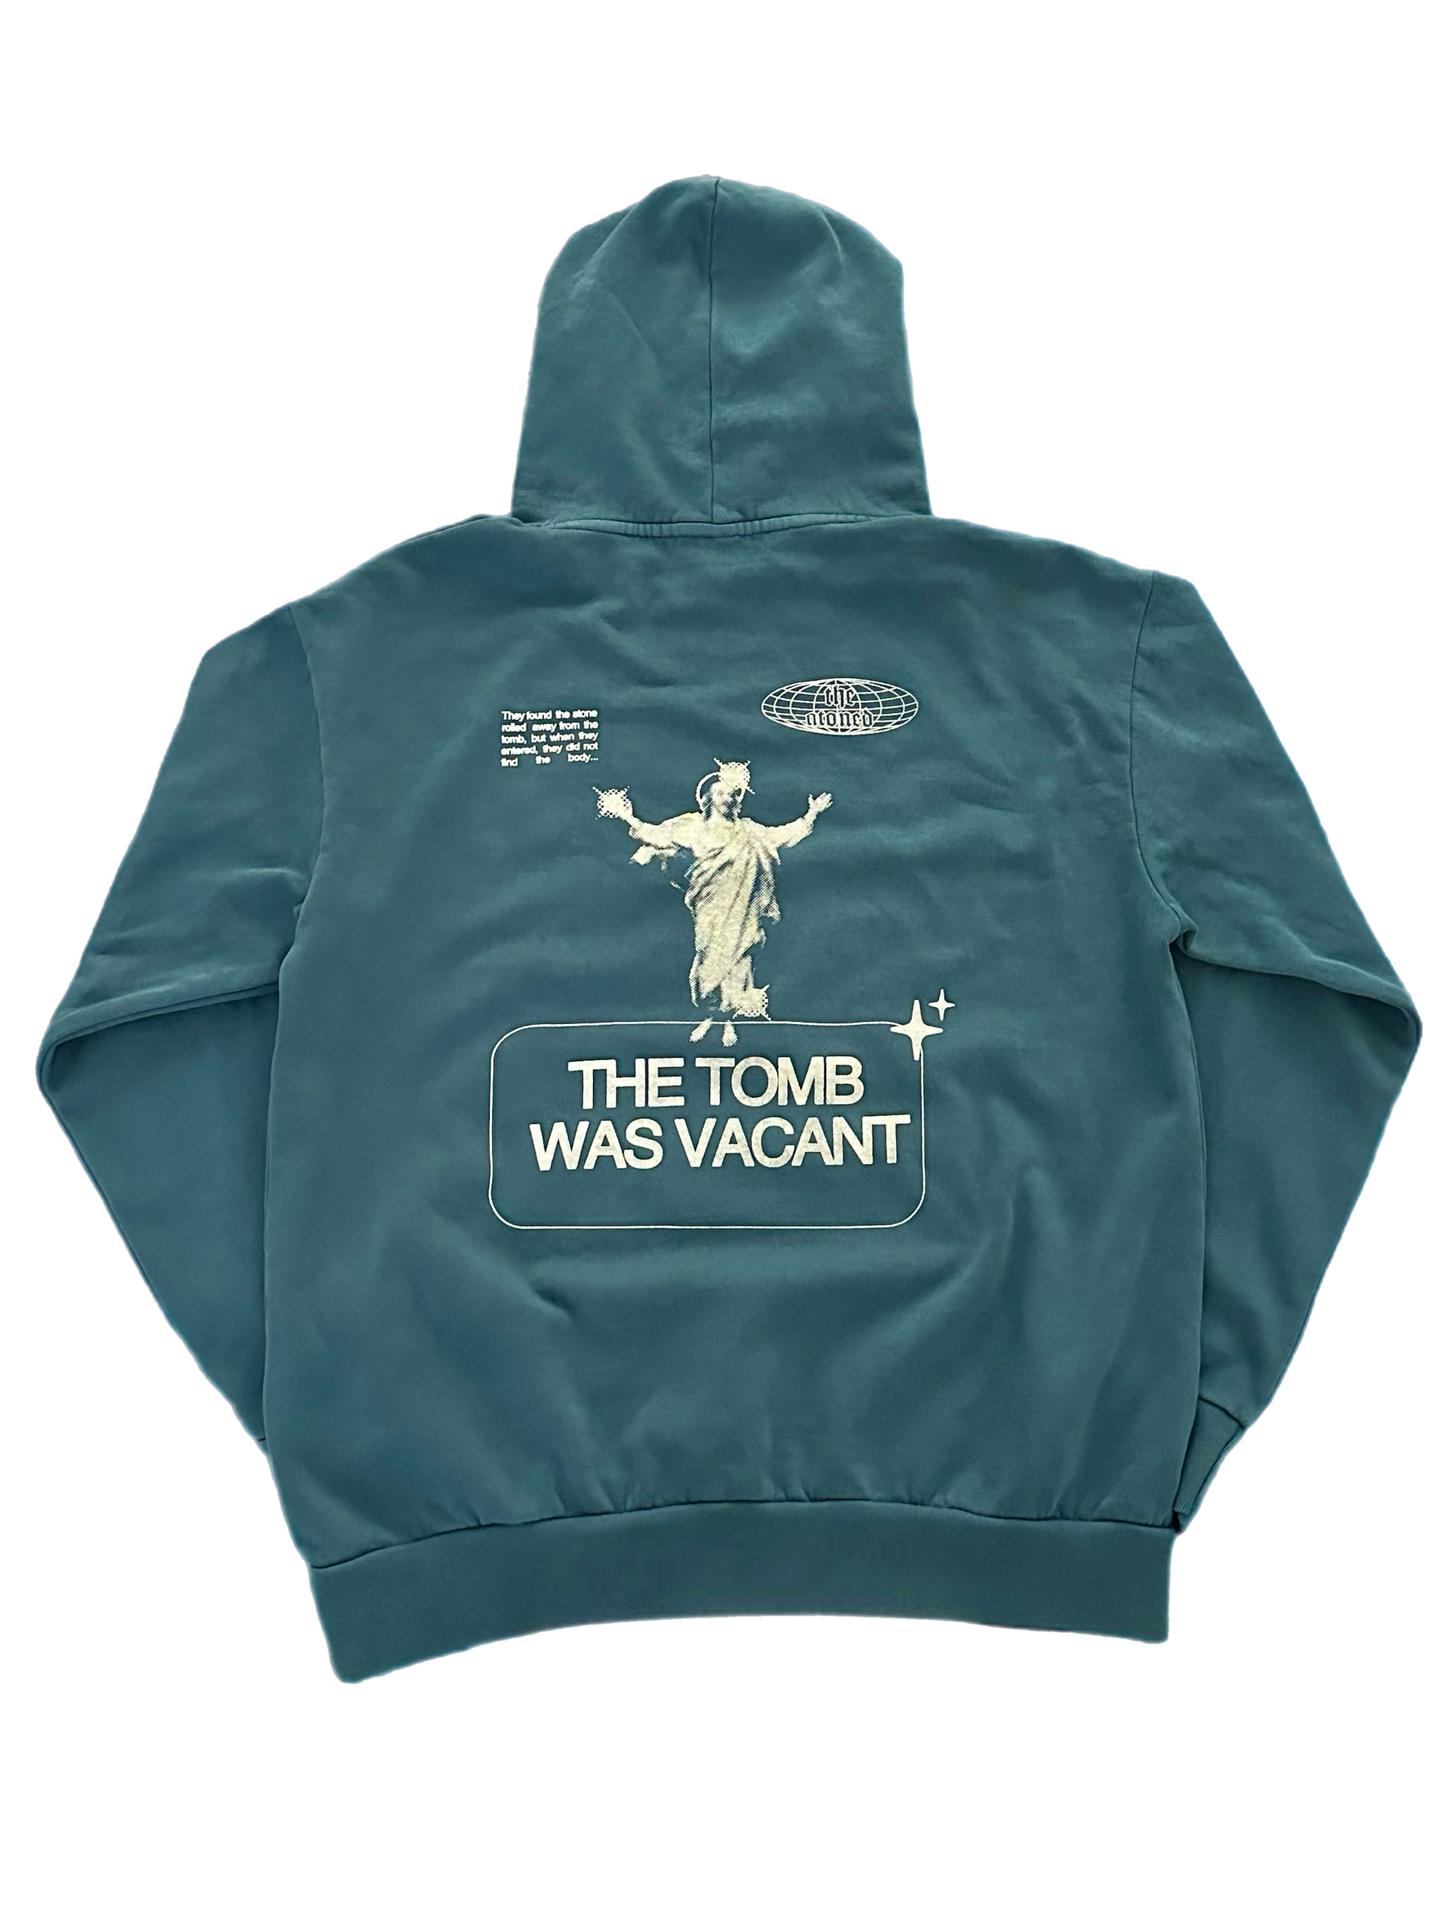 ‘THE TOMB WAS VACANT’- Heavyweight Hoodie (Denim Blue)